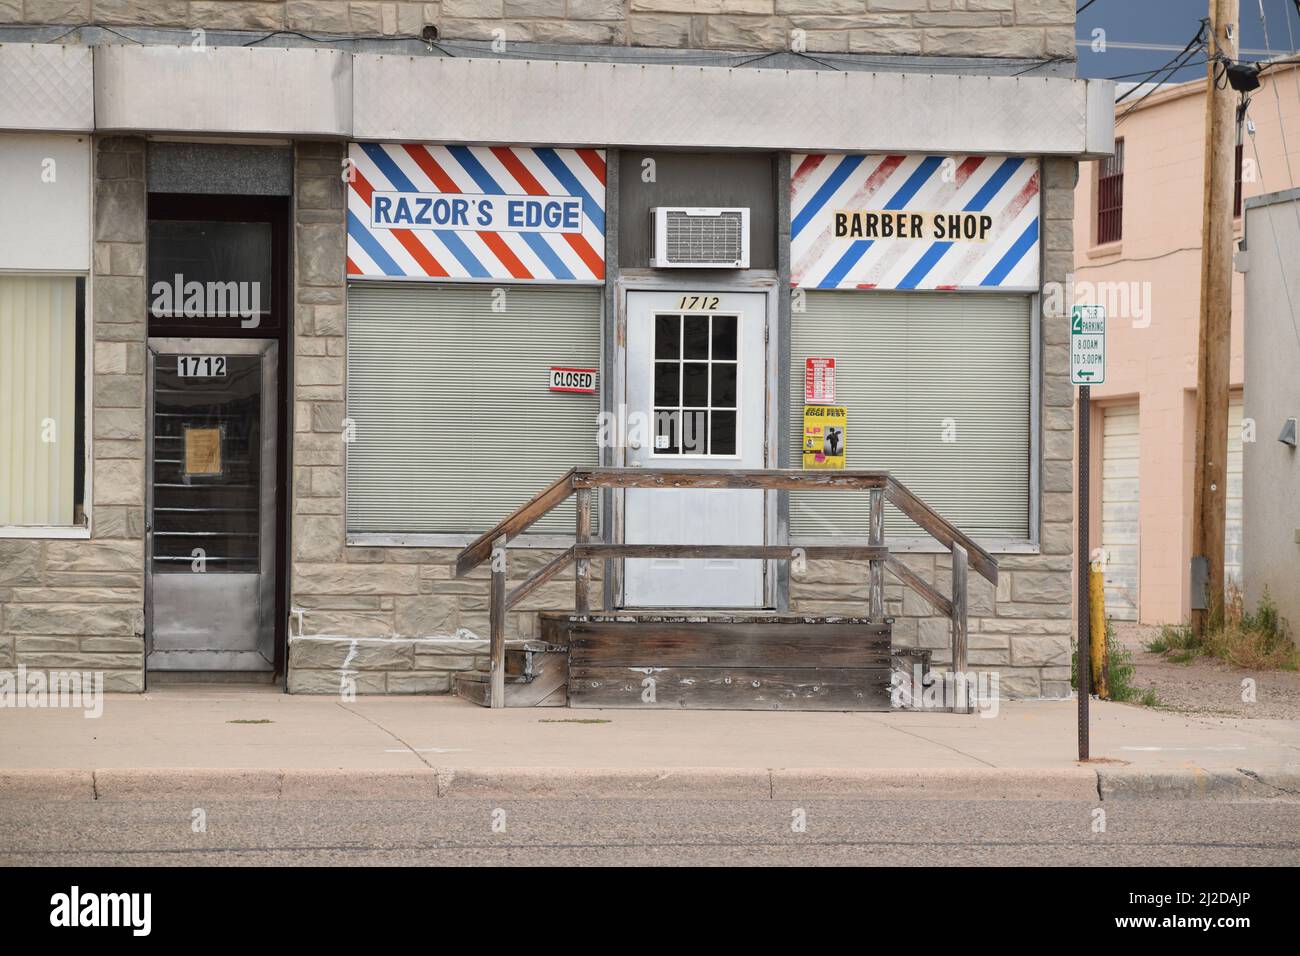 Razor's Edge barber shop on the west side of downtown Cheyenne Wyoming - August 2021 Stock Photo